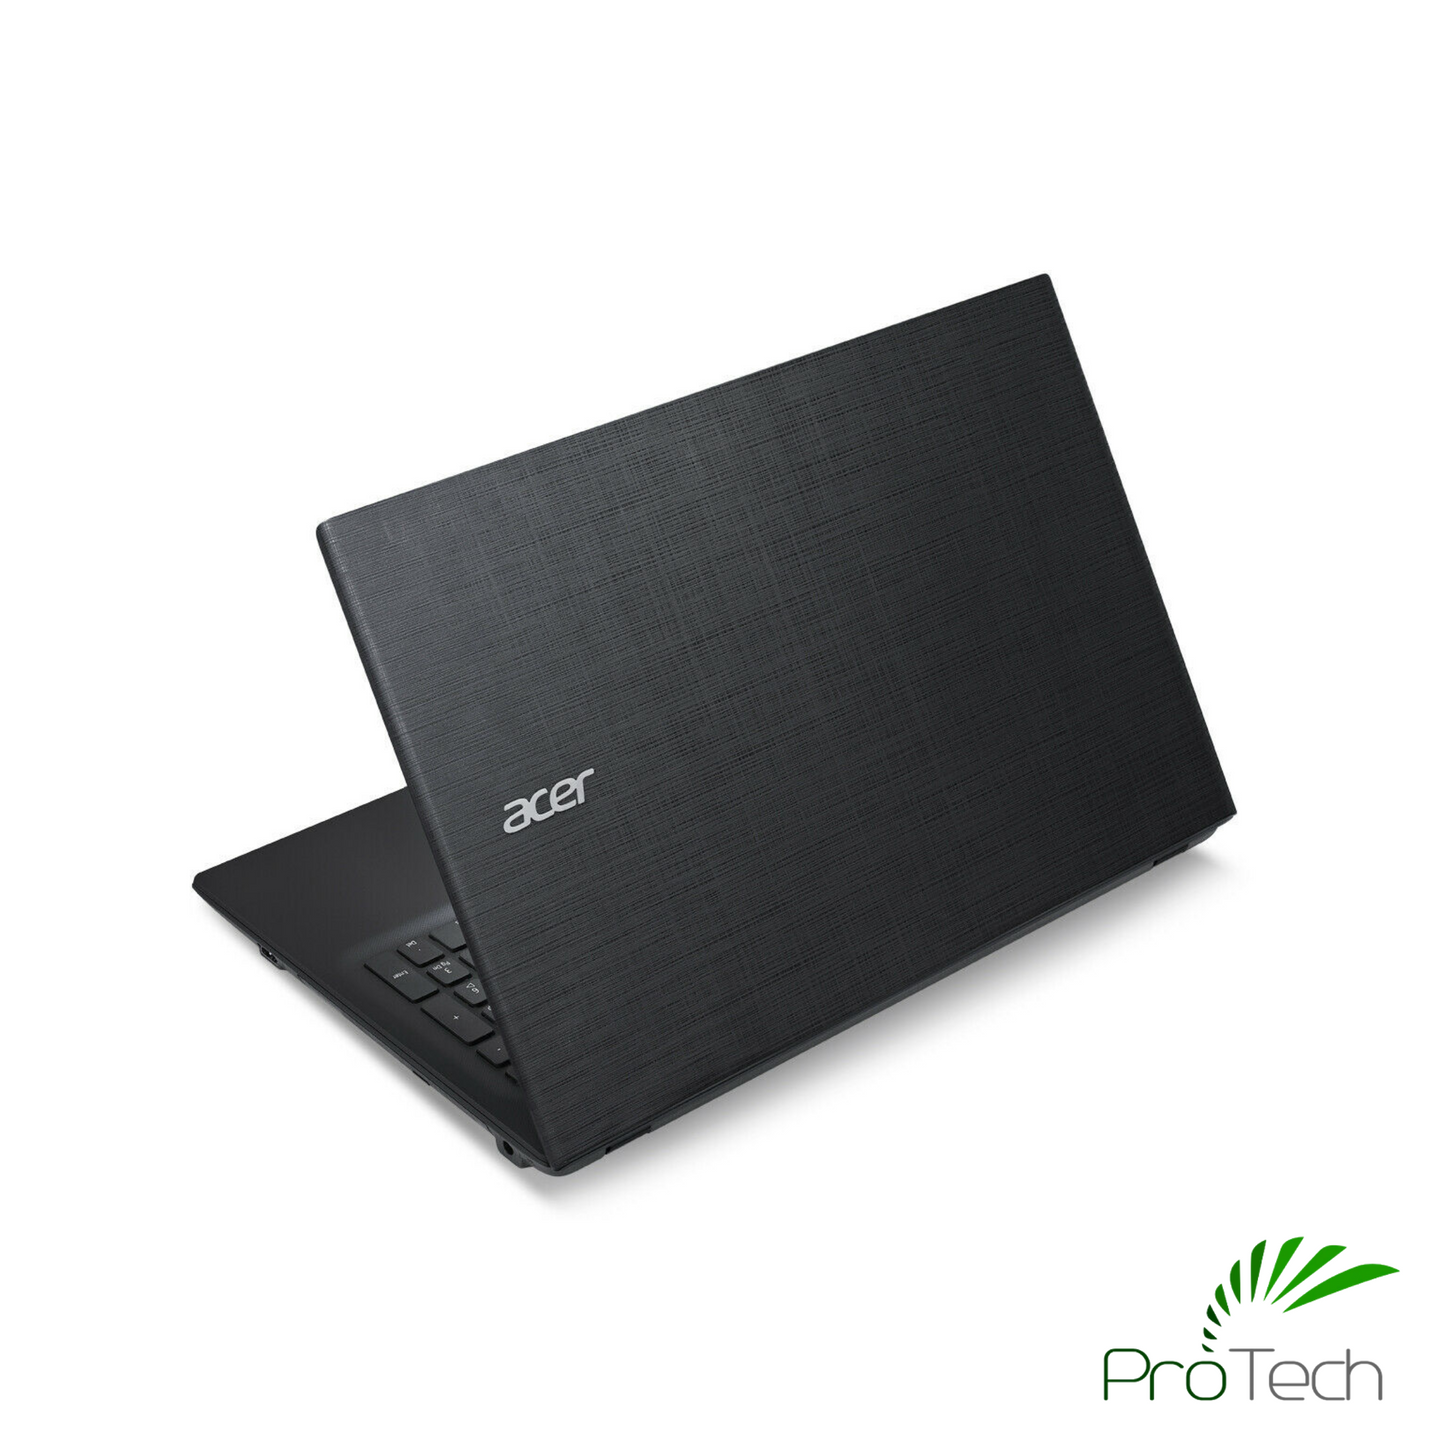 Acer TravelMate TMP257 15.6" | Core i3 | 4GB RAM | 500GB HDD